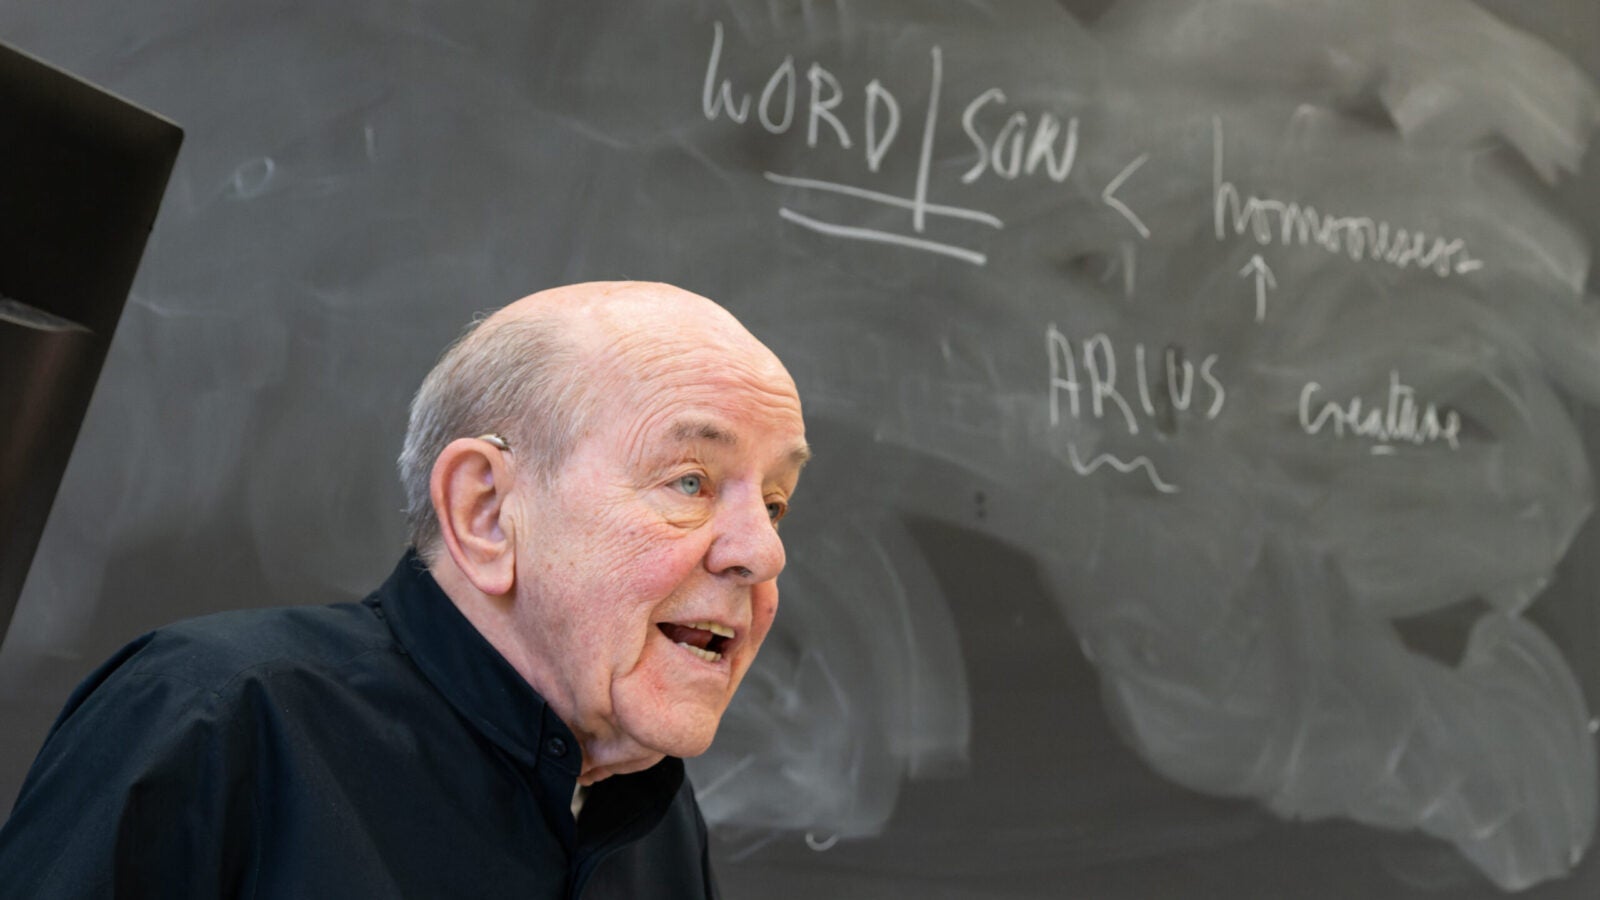 a priest stands in front of a chalkboard